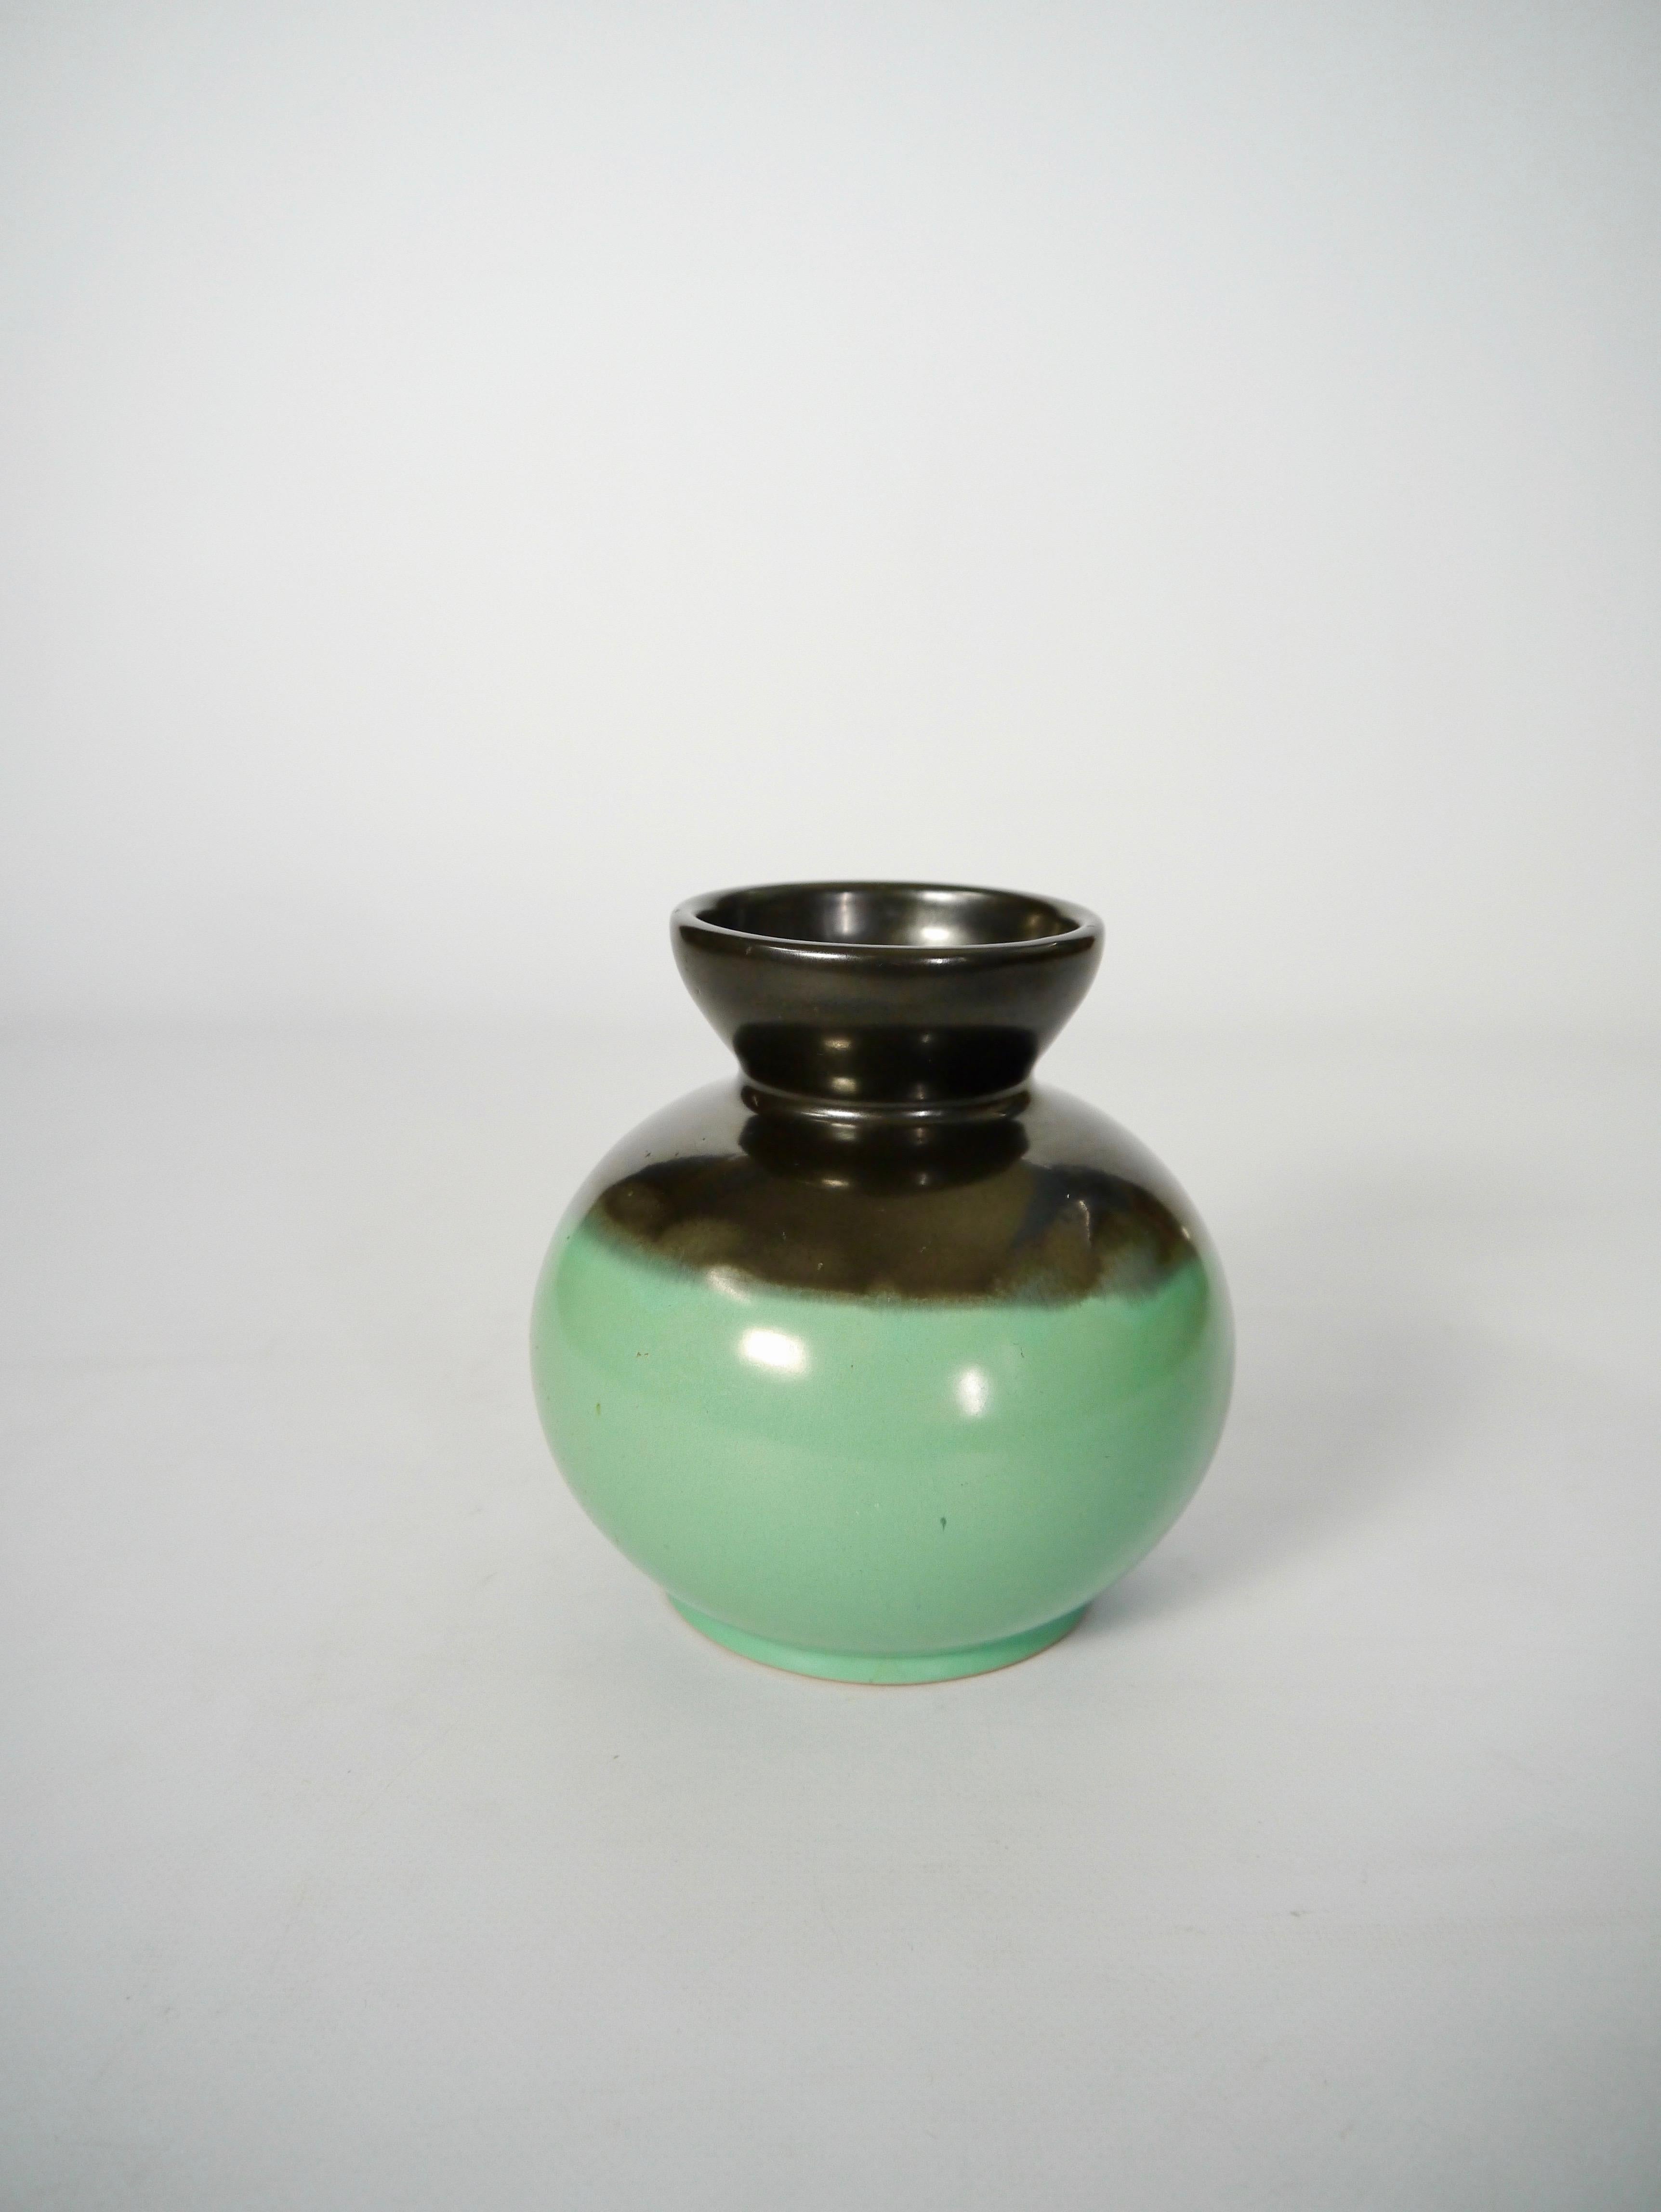 Beautifully simple and clean shapes and color scheme on this 1930s Upsala-Ekeby vase. Art Deco-colors and glaze meets the more austere esthetics of the Scandinavian modernism.